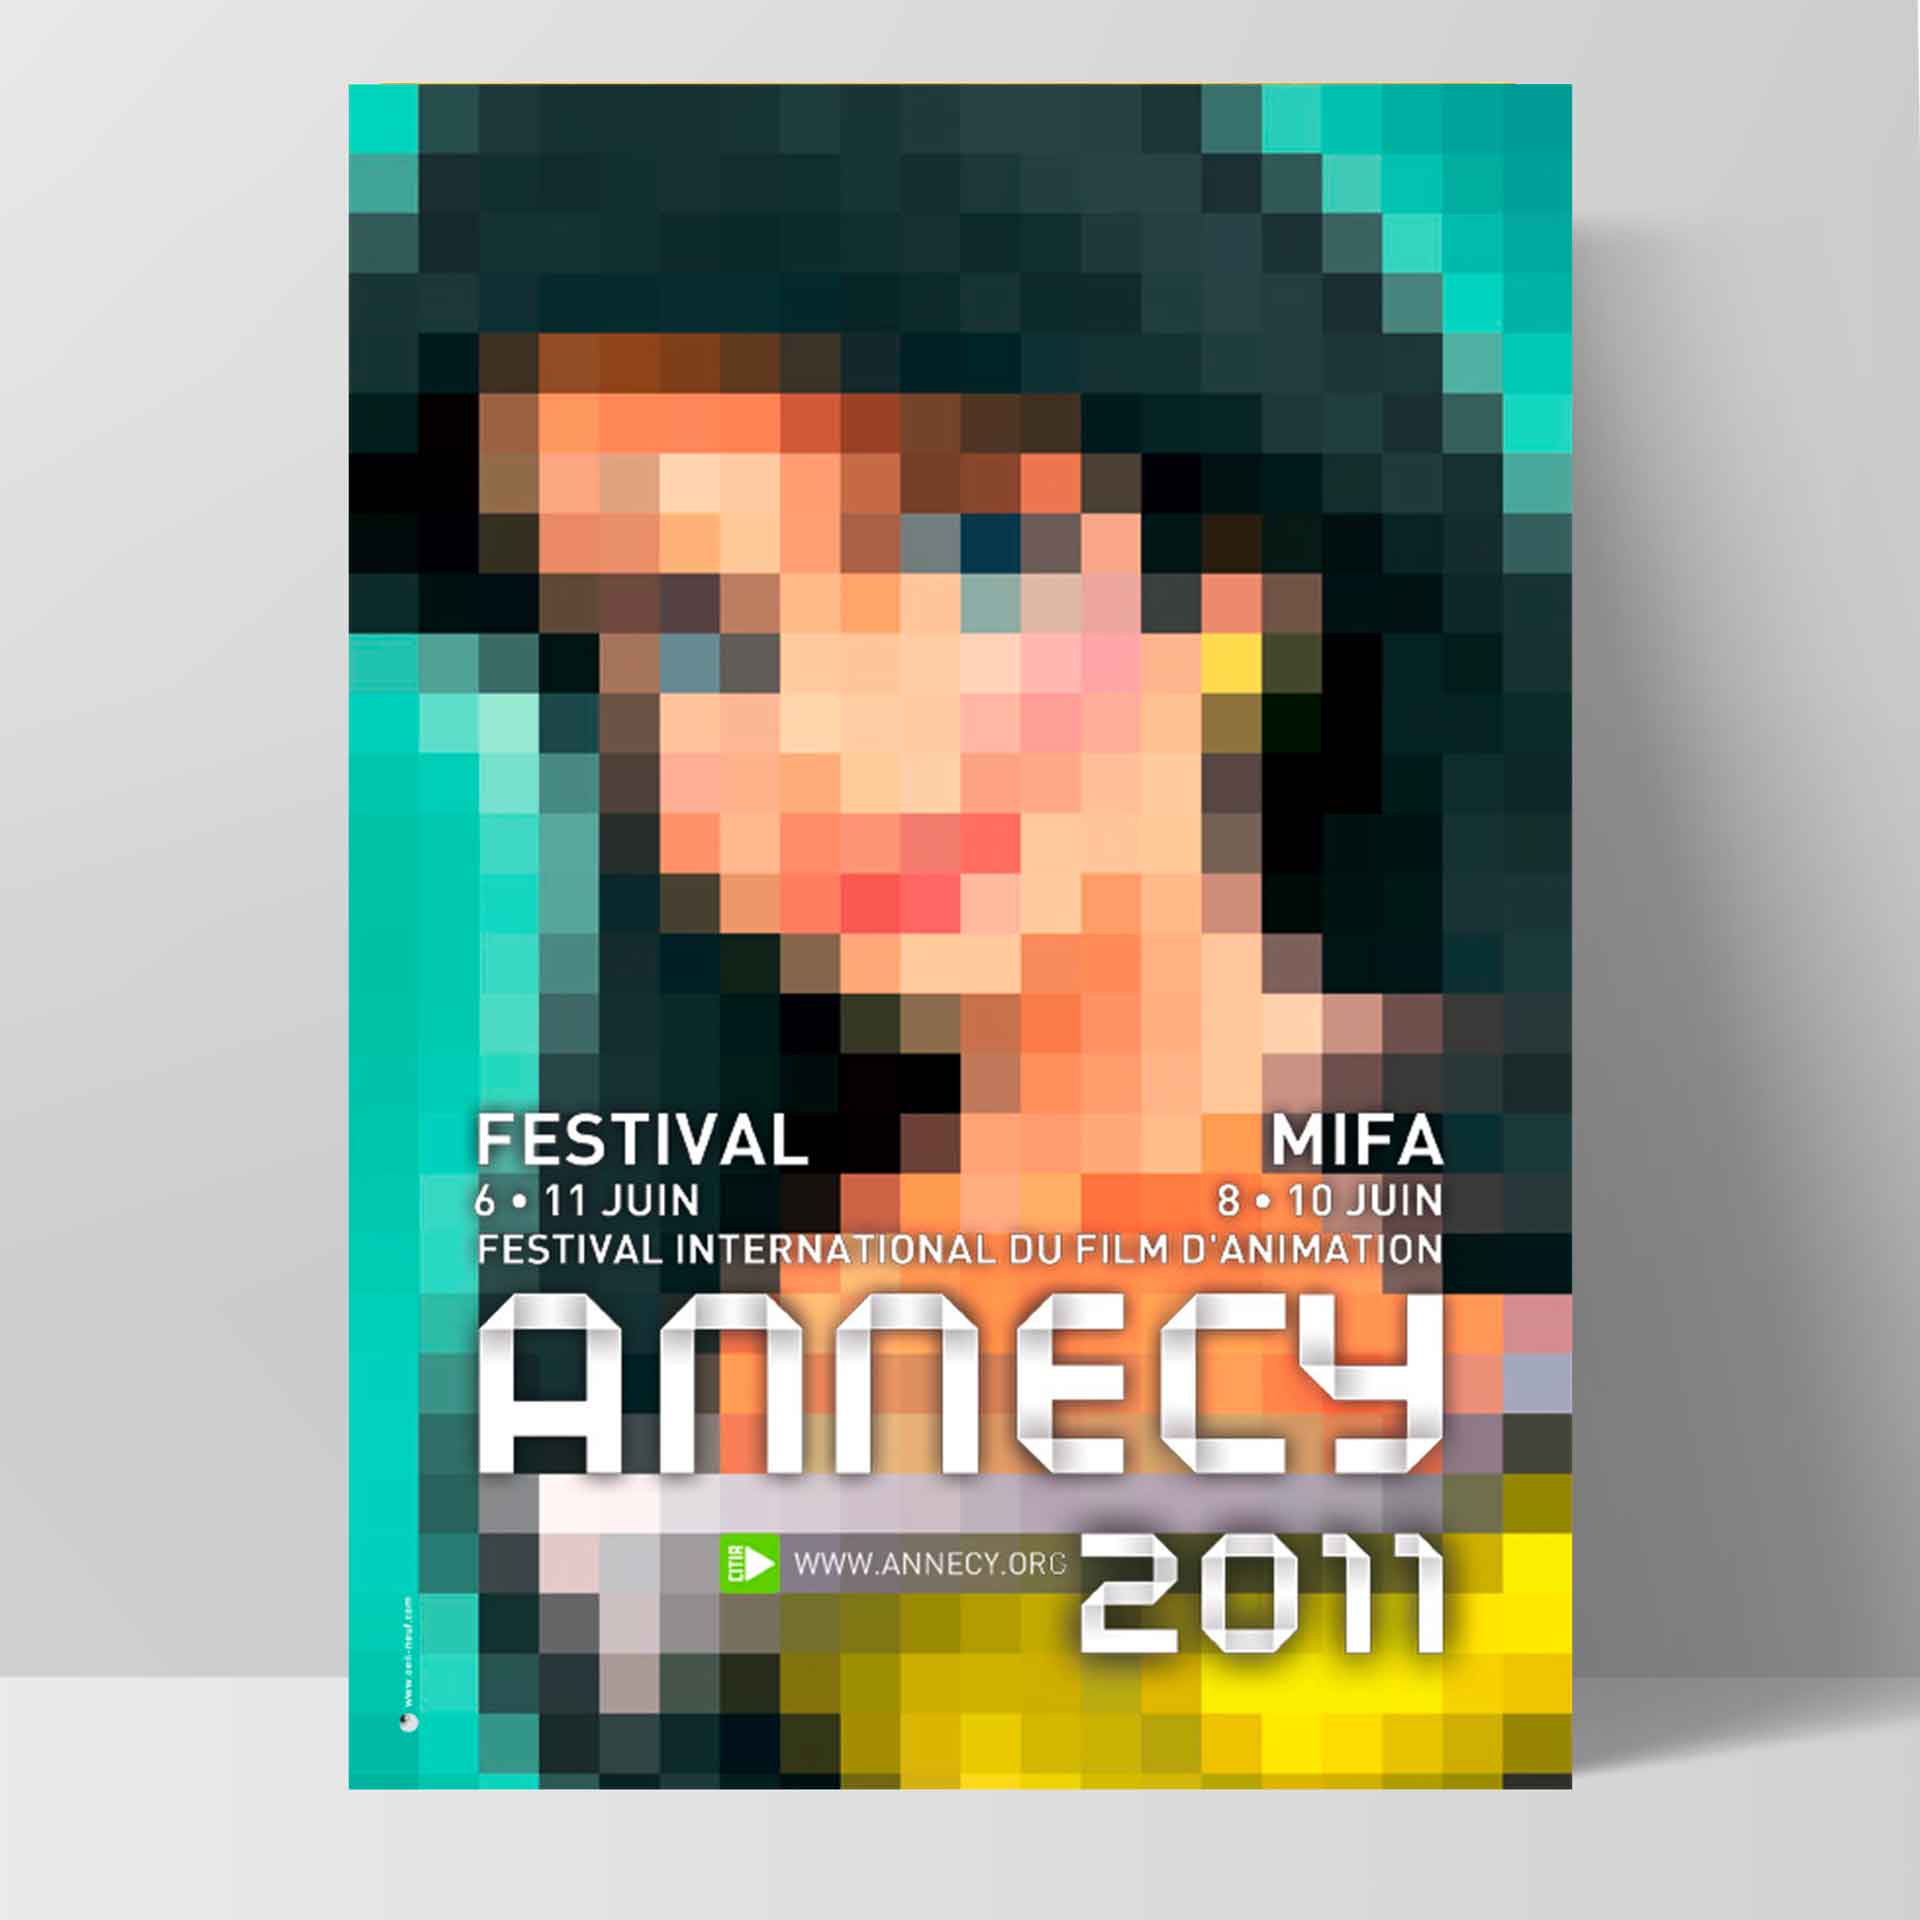 Annecy.org